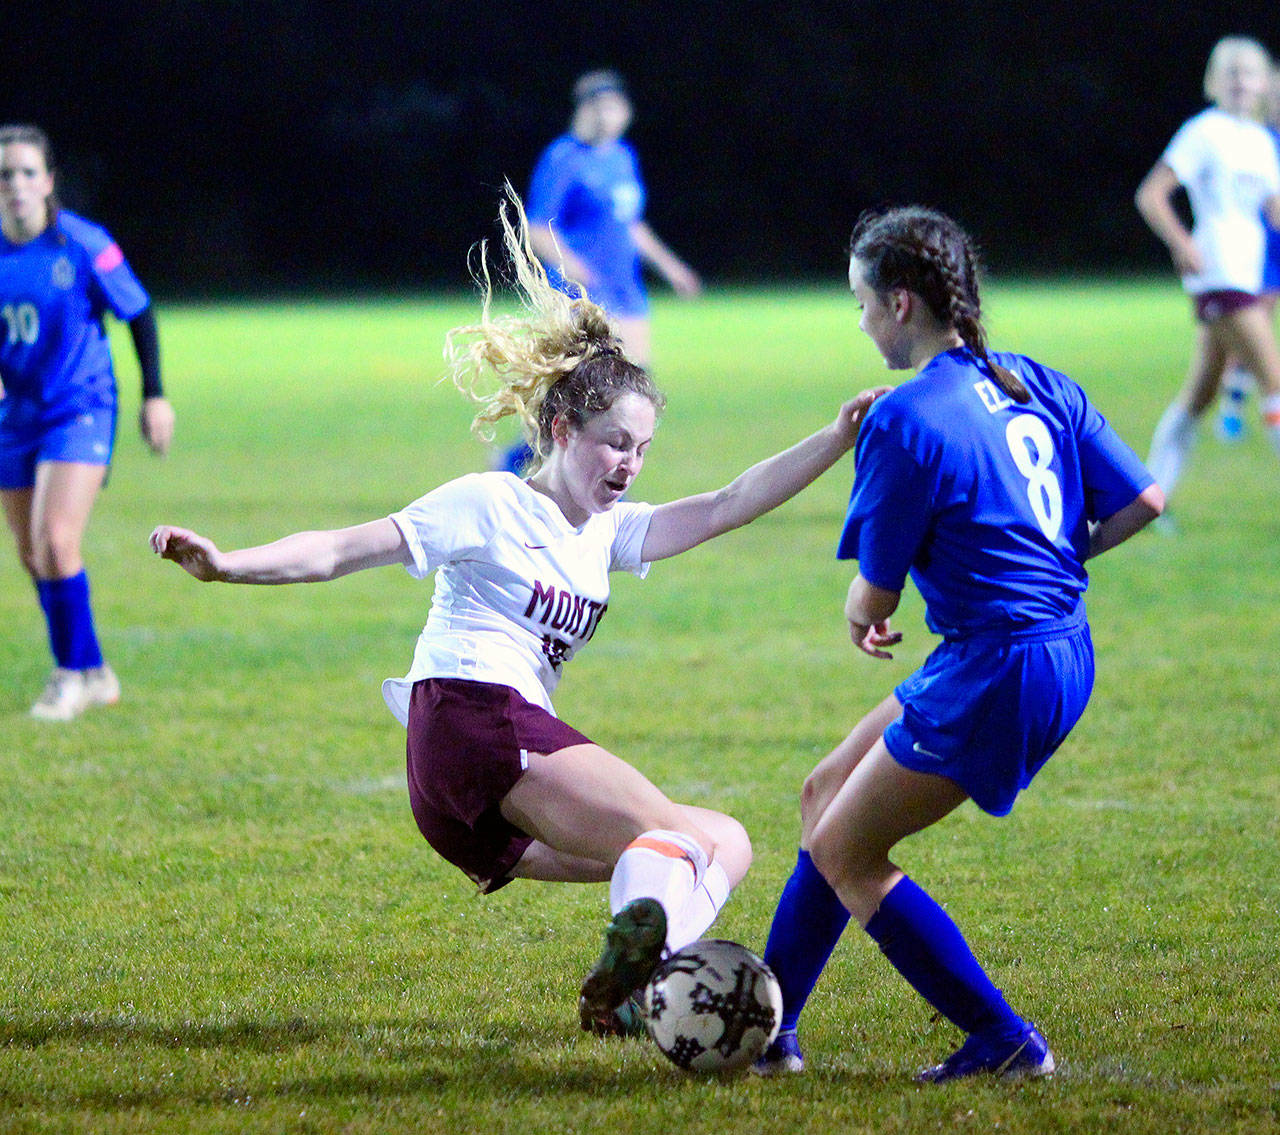 Montesano’s Brooke Streeter executes a slide tackle to get the ball away from Elma’s Janessa Sample in the second half of a match on Tuesday in Elma. (Hasani Grayson | Grays Harbor News Group)